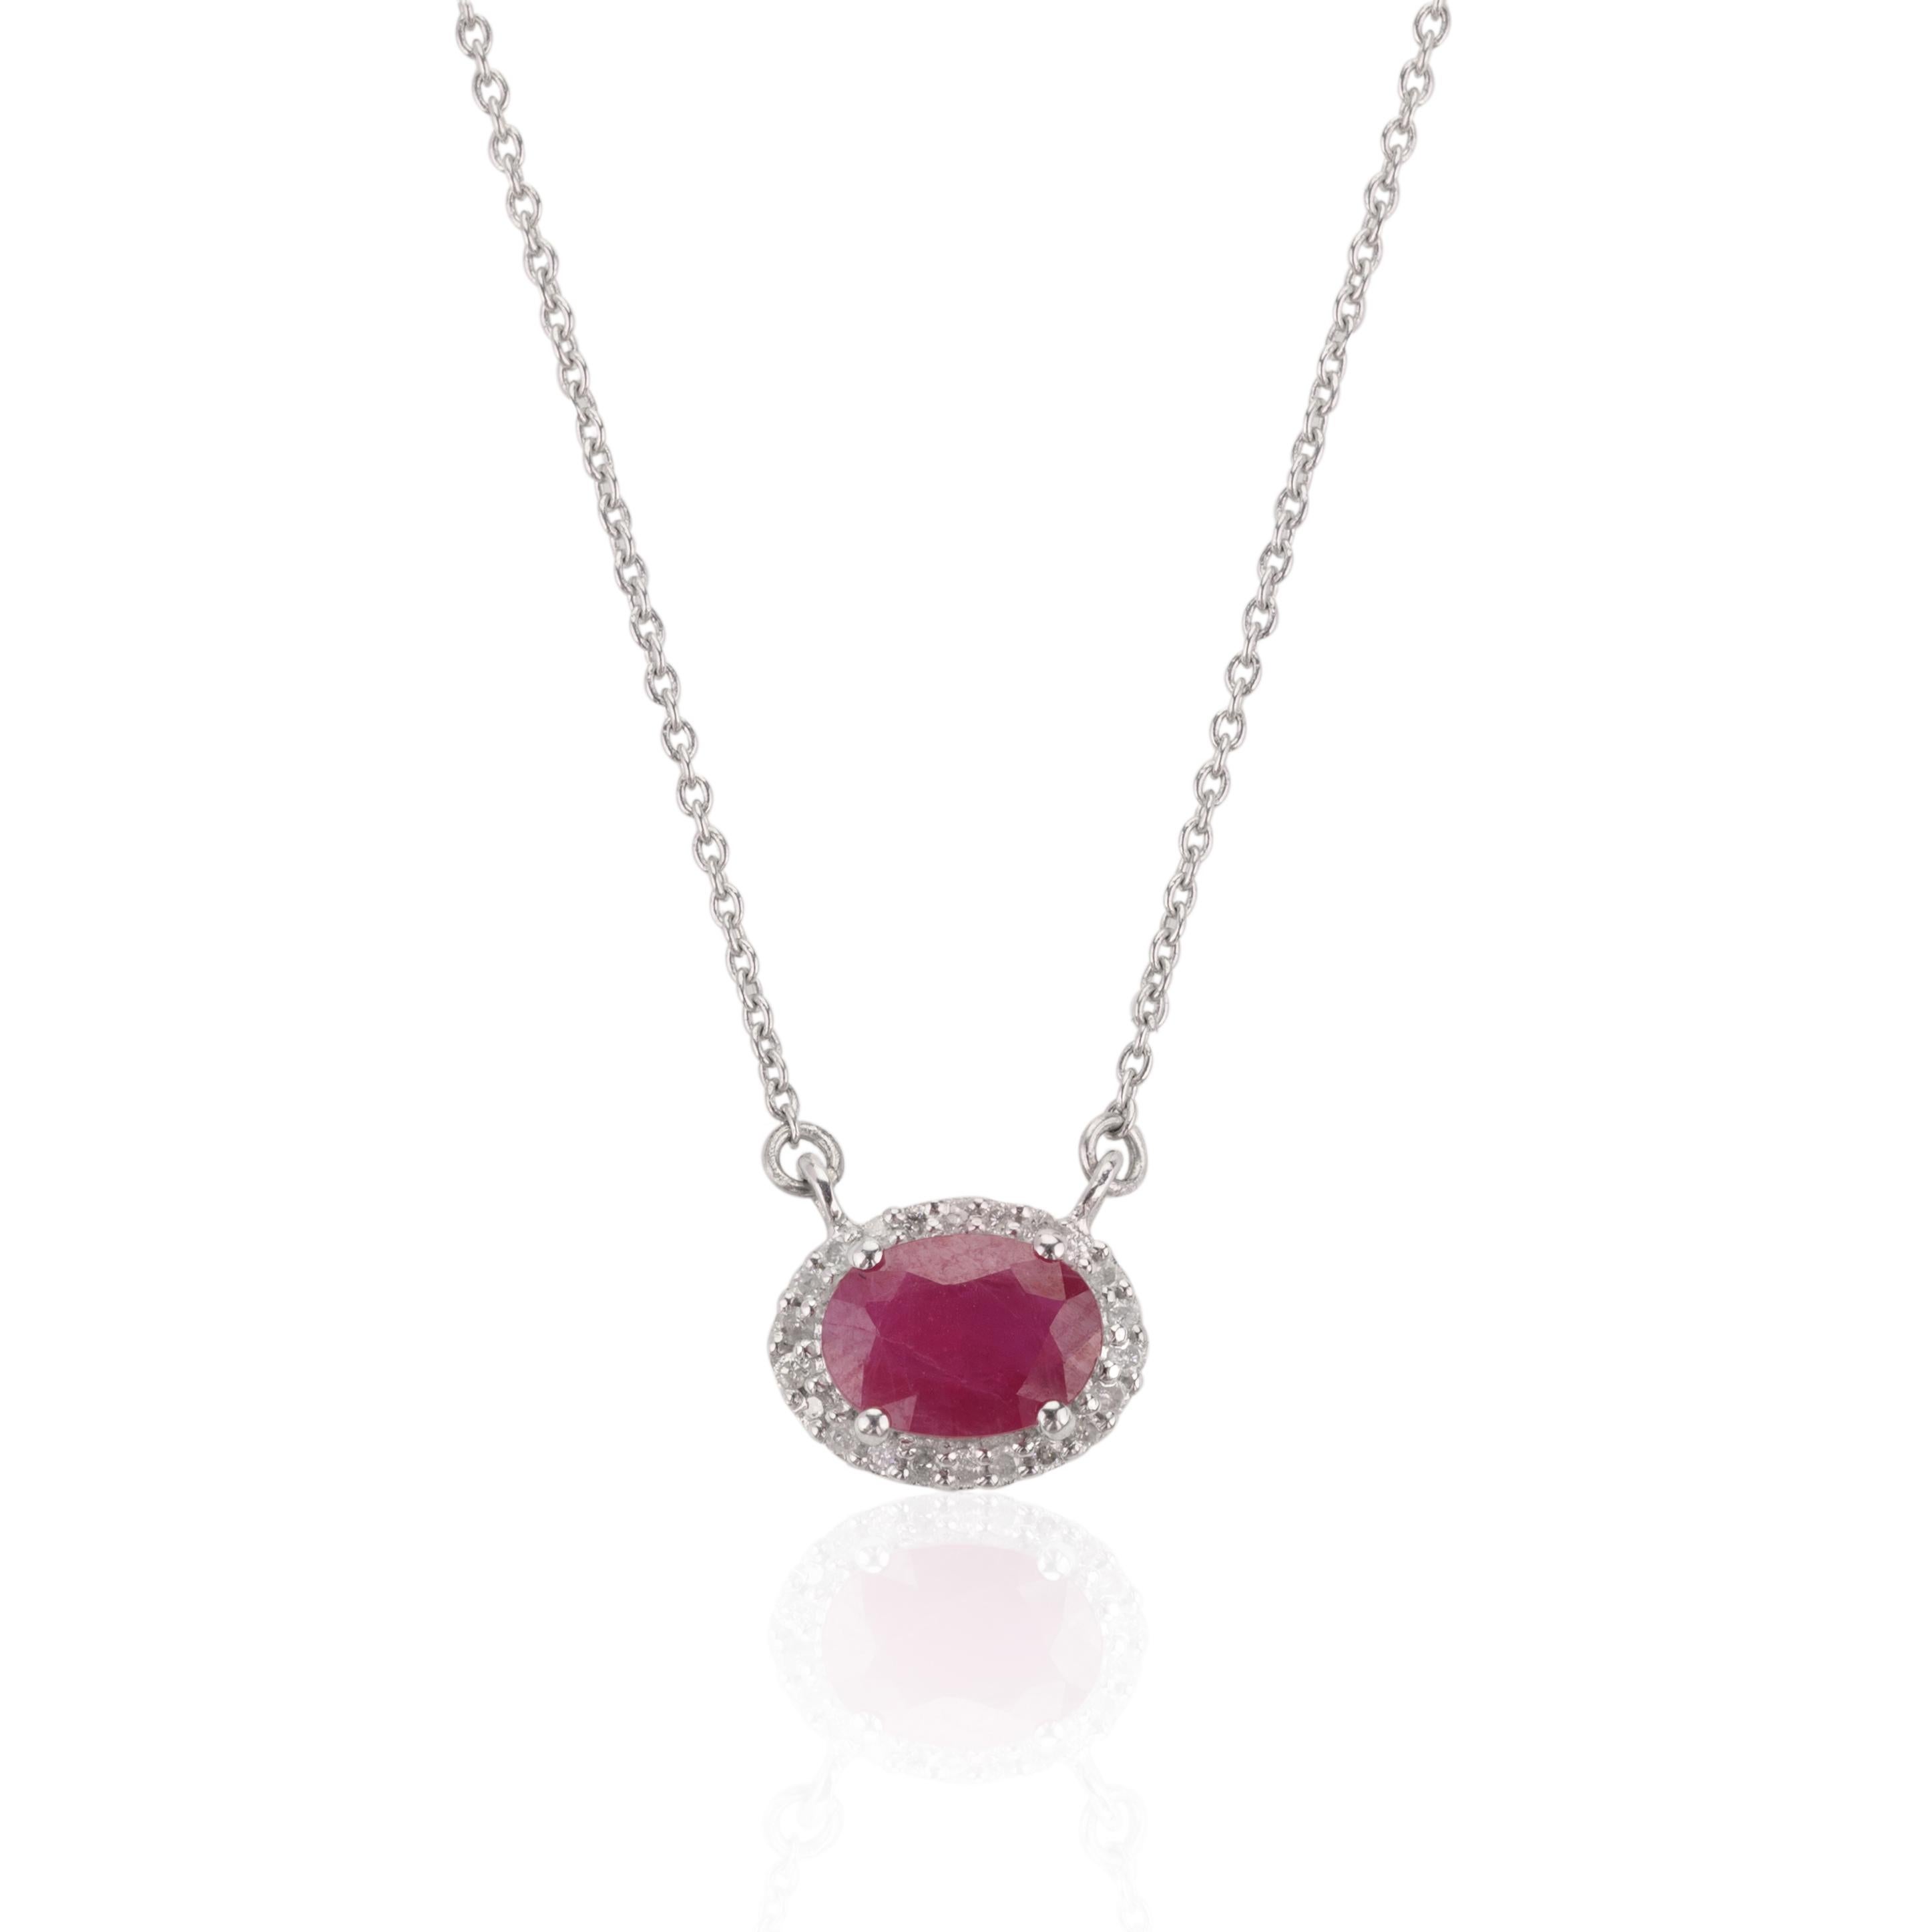 Oval Cut Oval Ruby with Diamond Halo Pendant Necklace in 14k Solid White Gold for Her